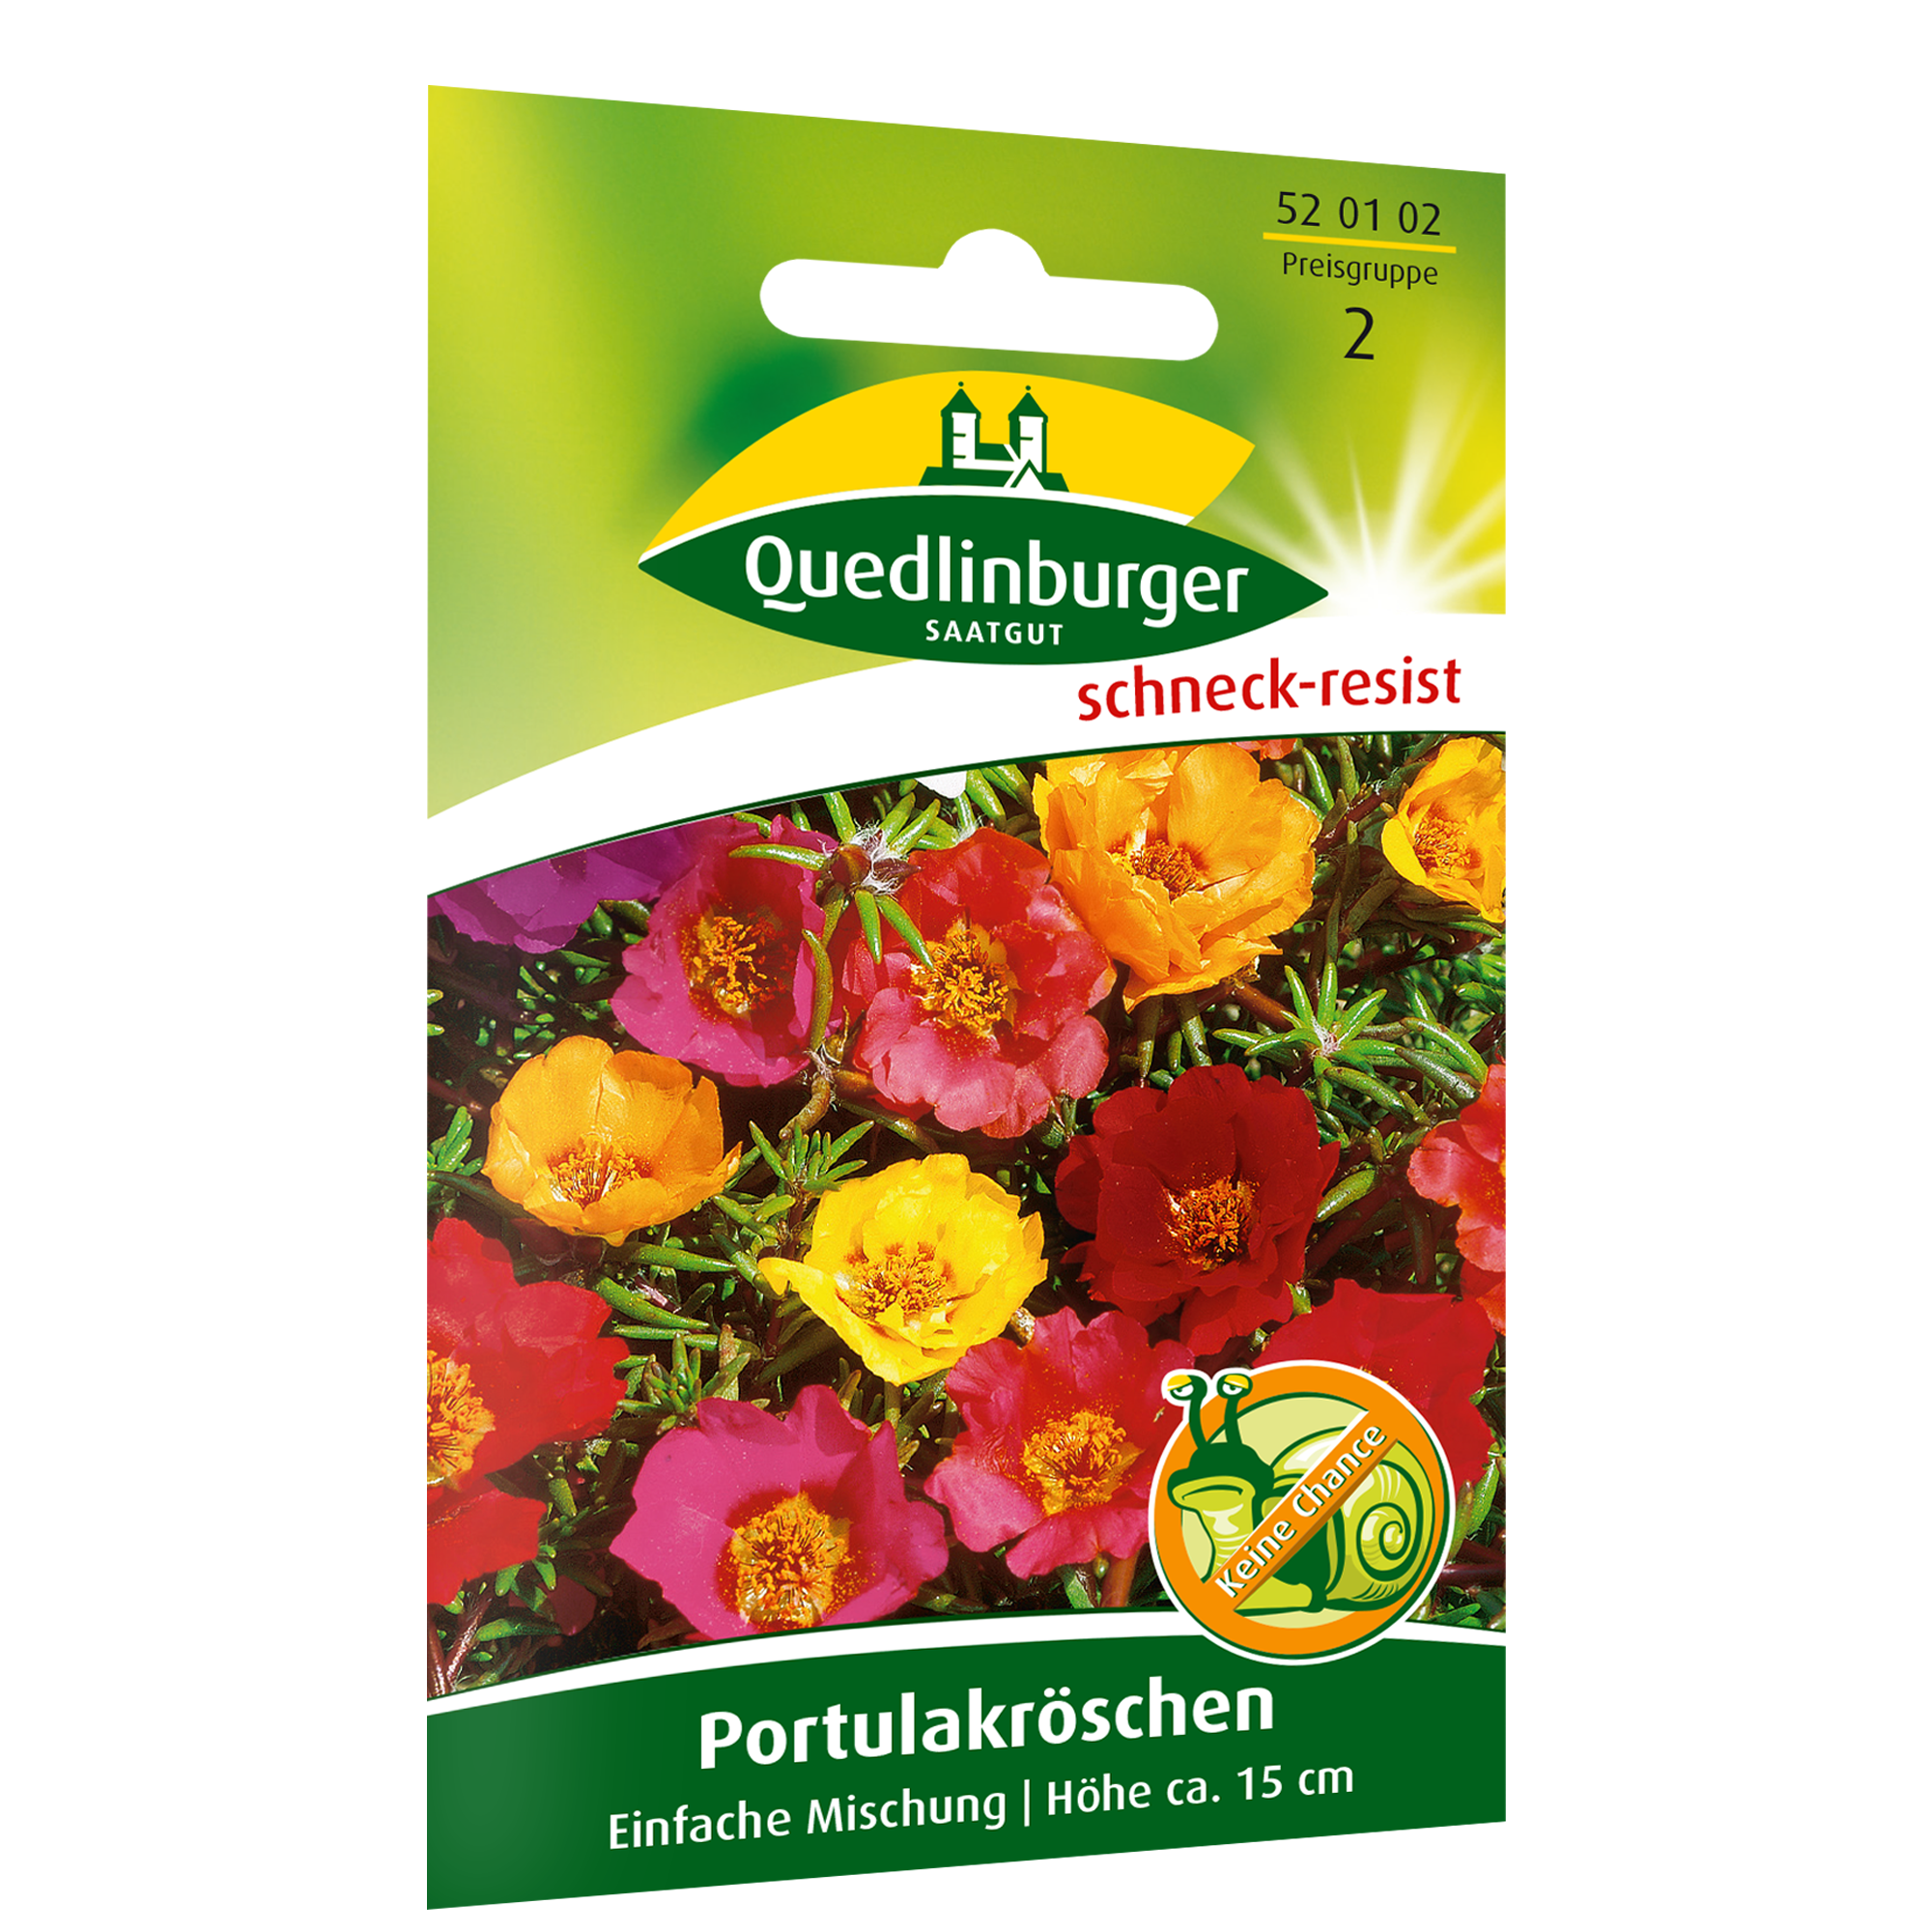 Portulakröschen Mischung + product picture